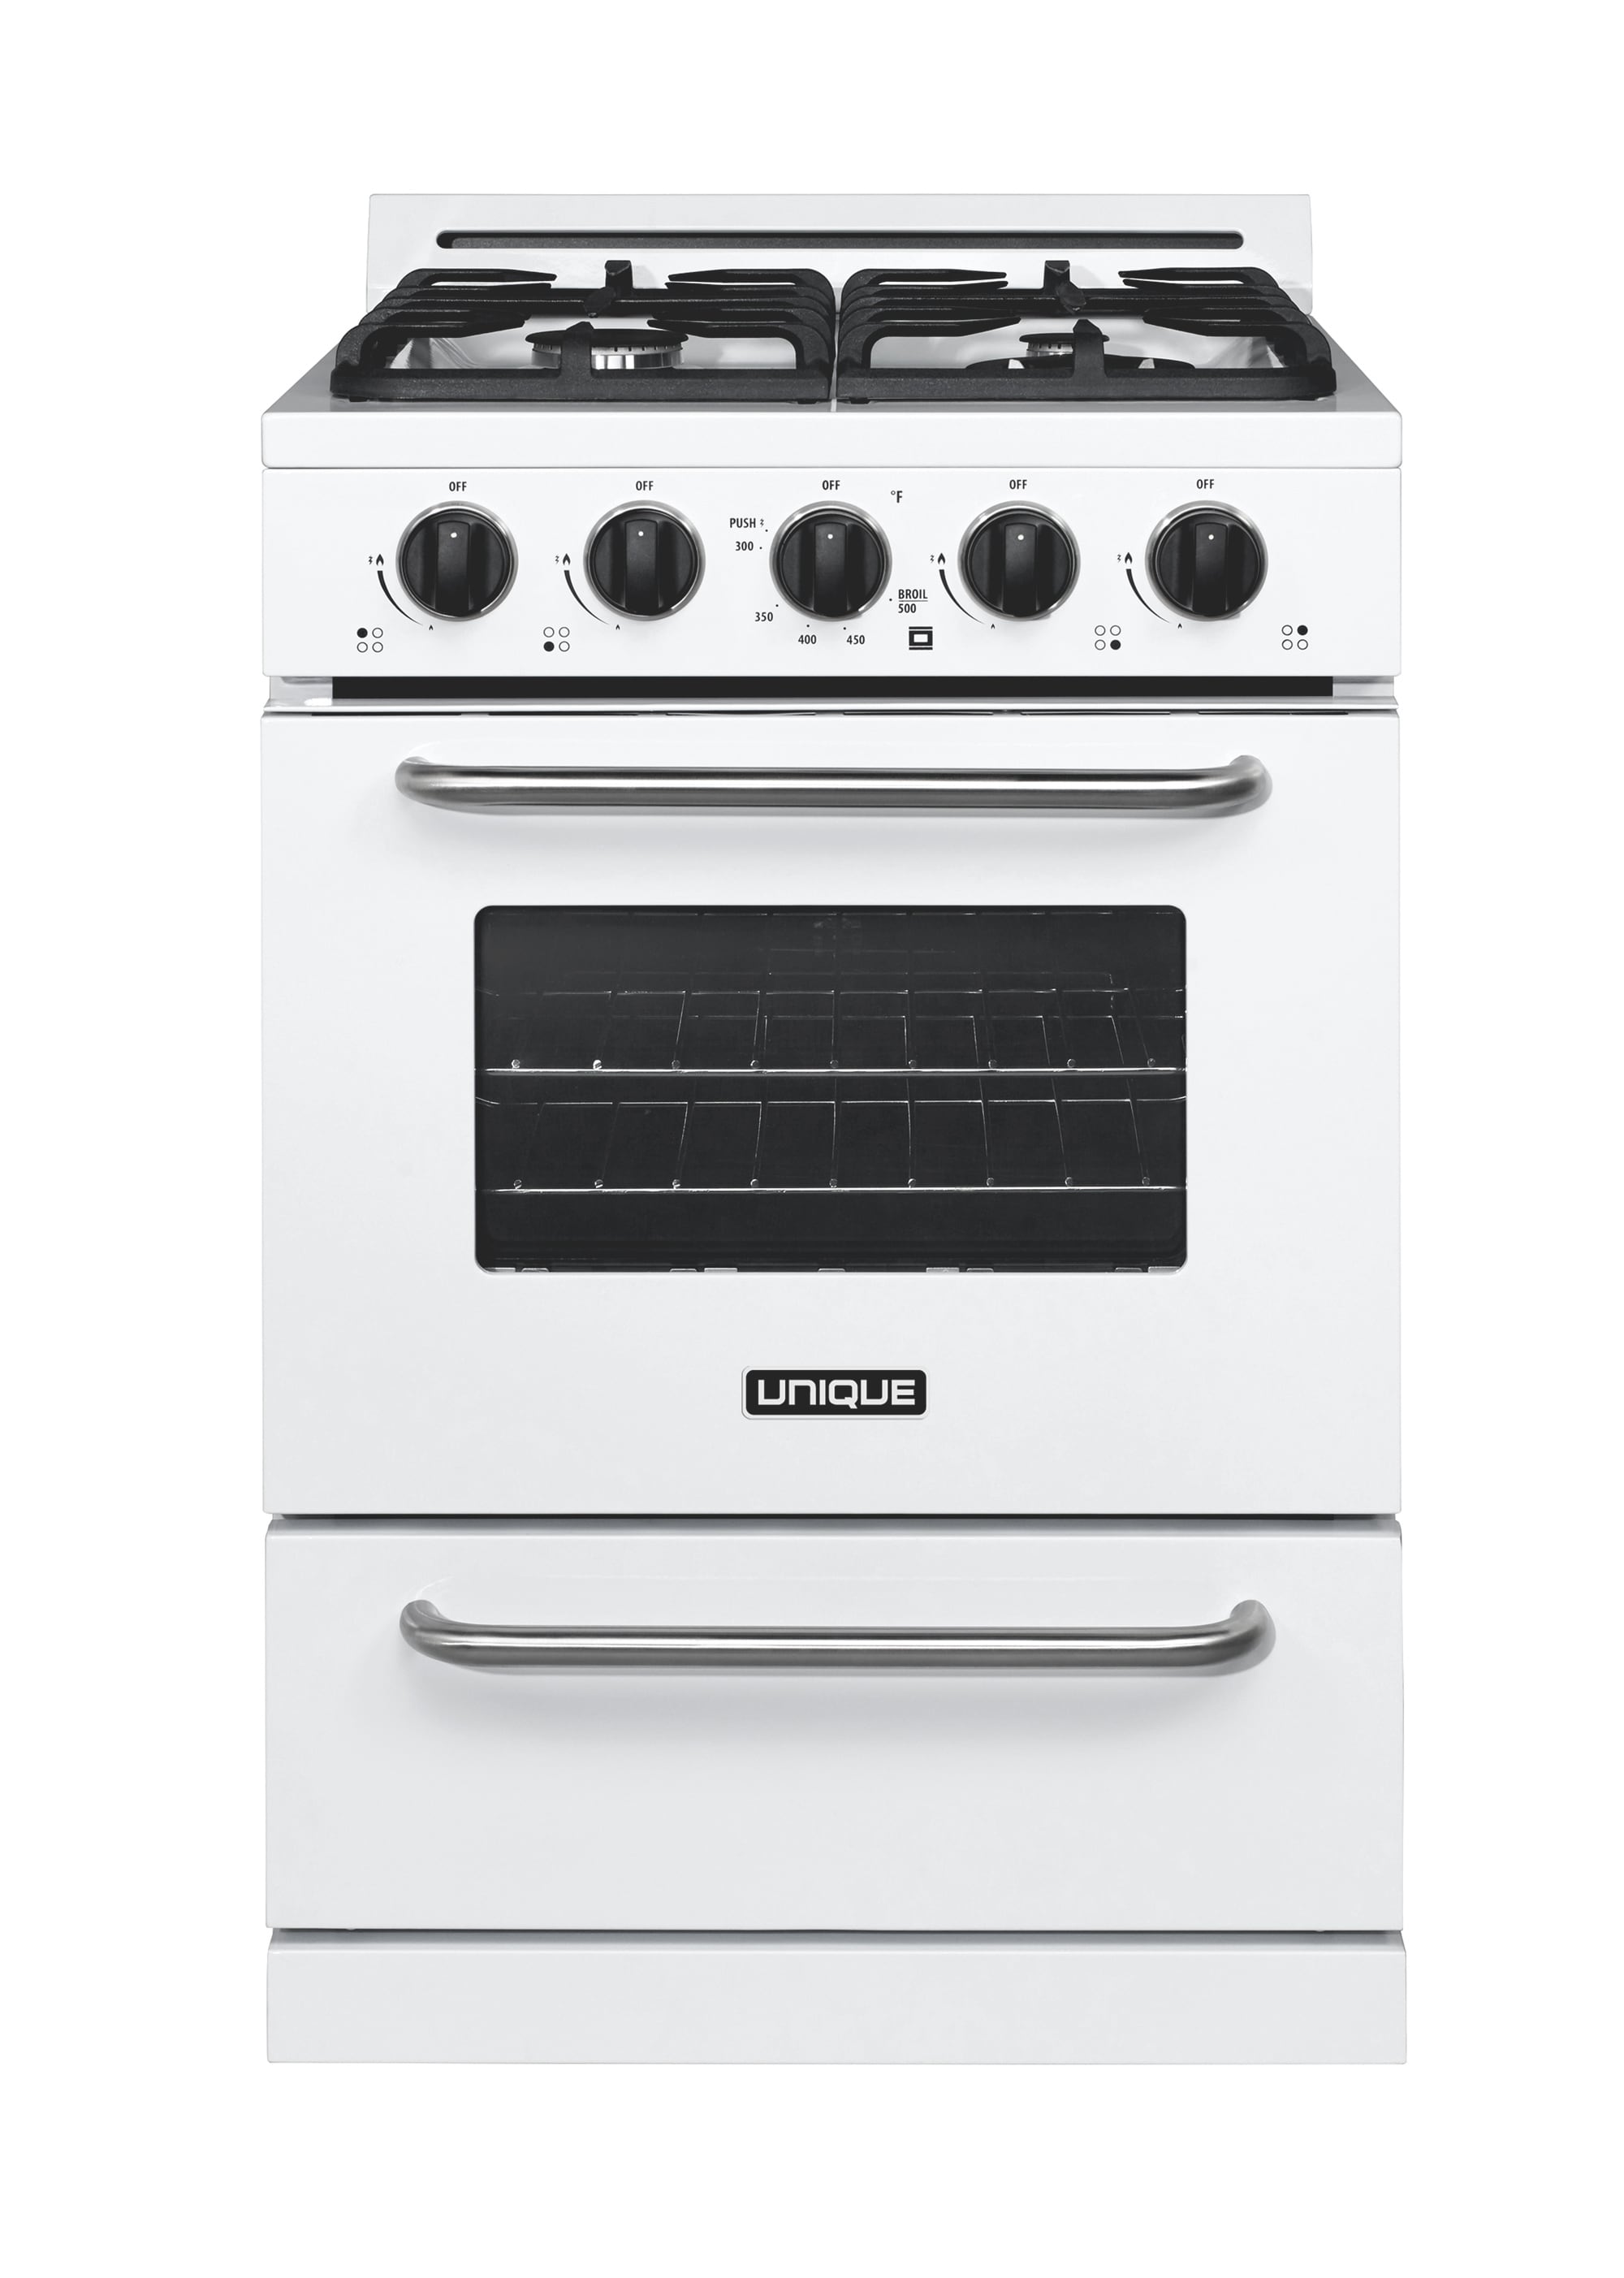 Getting the Most Out of Your Propane Cooking Range